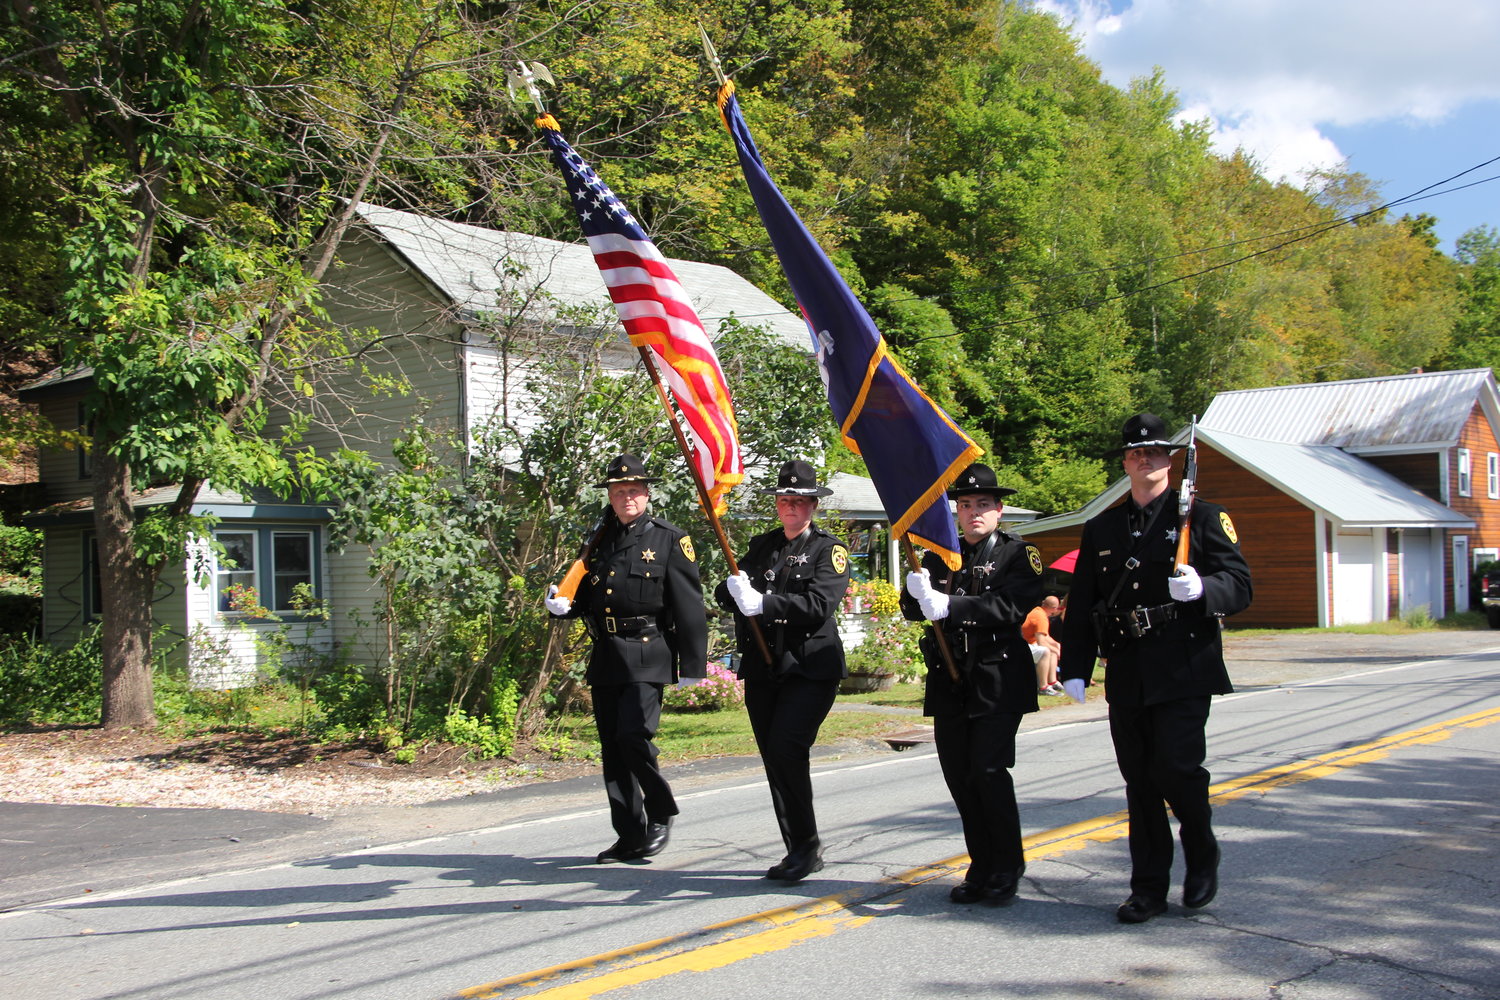 The Sullivan County Sheriff’s Department color guard included Undersheriff Eric Chaboty (far left).